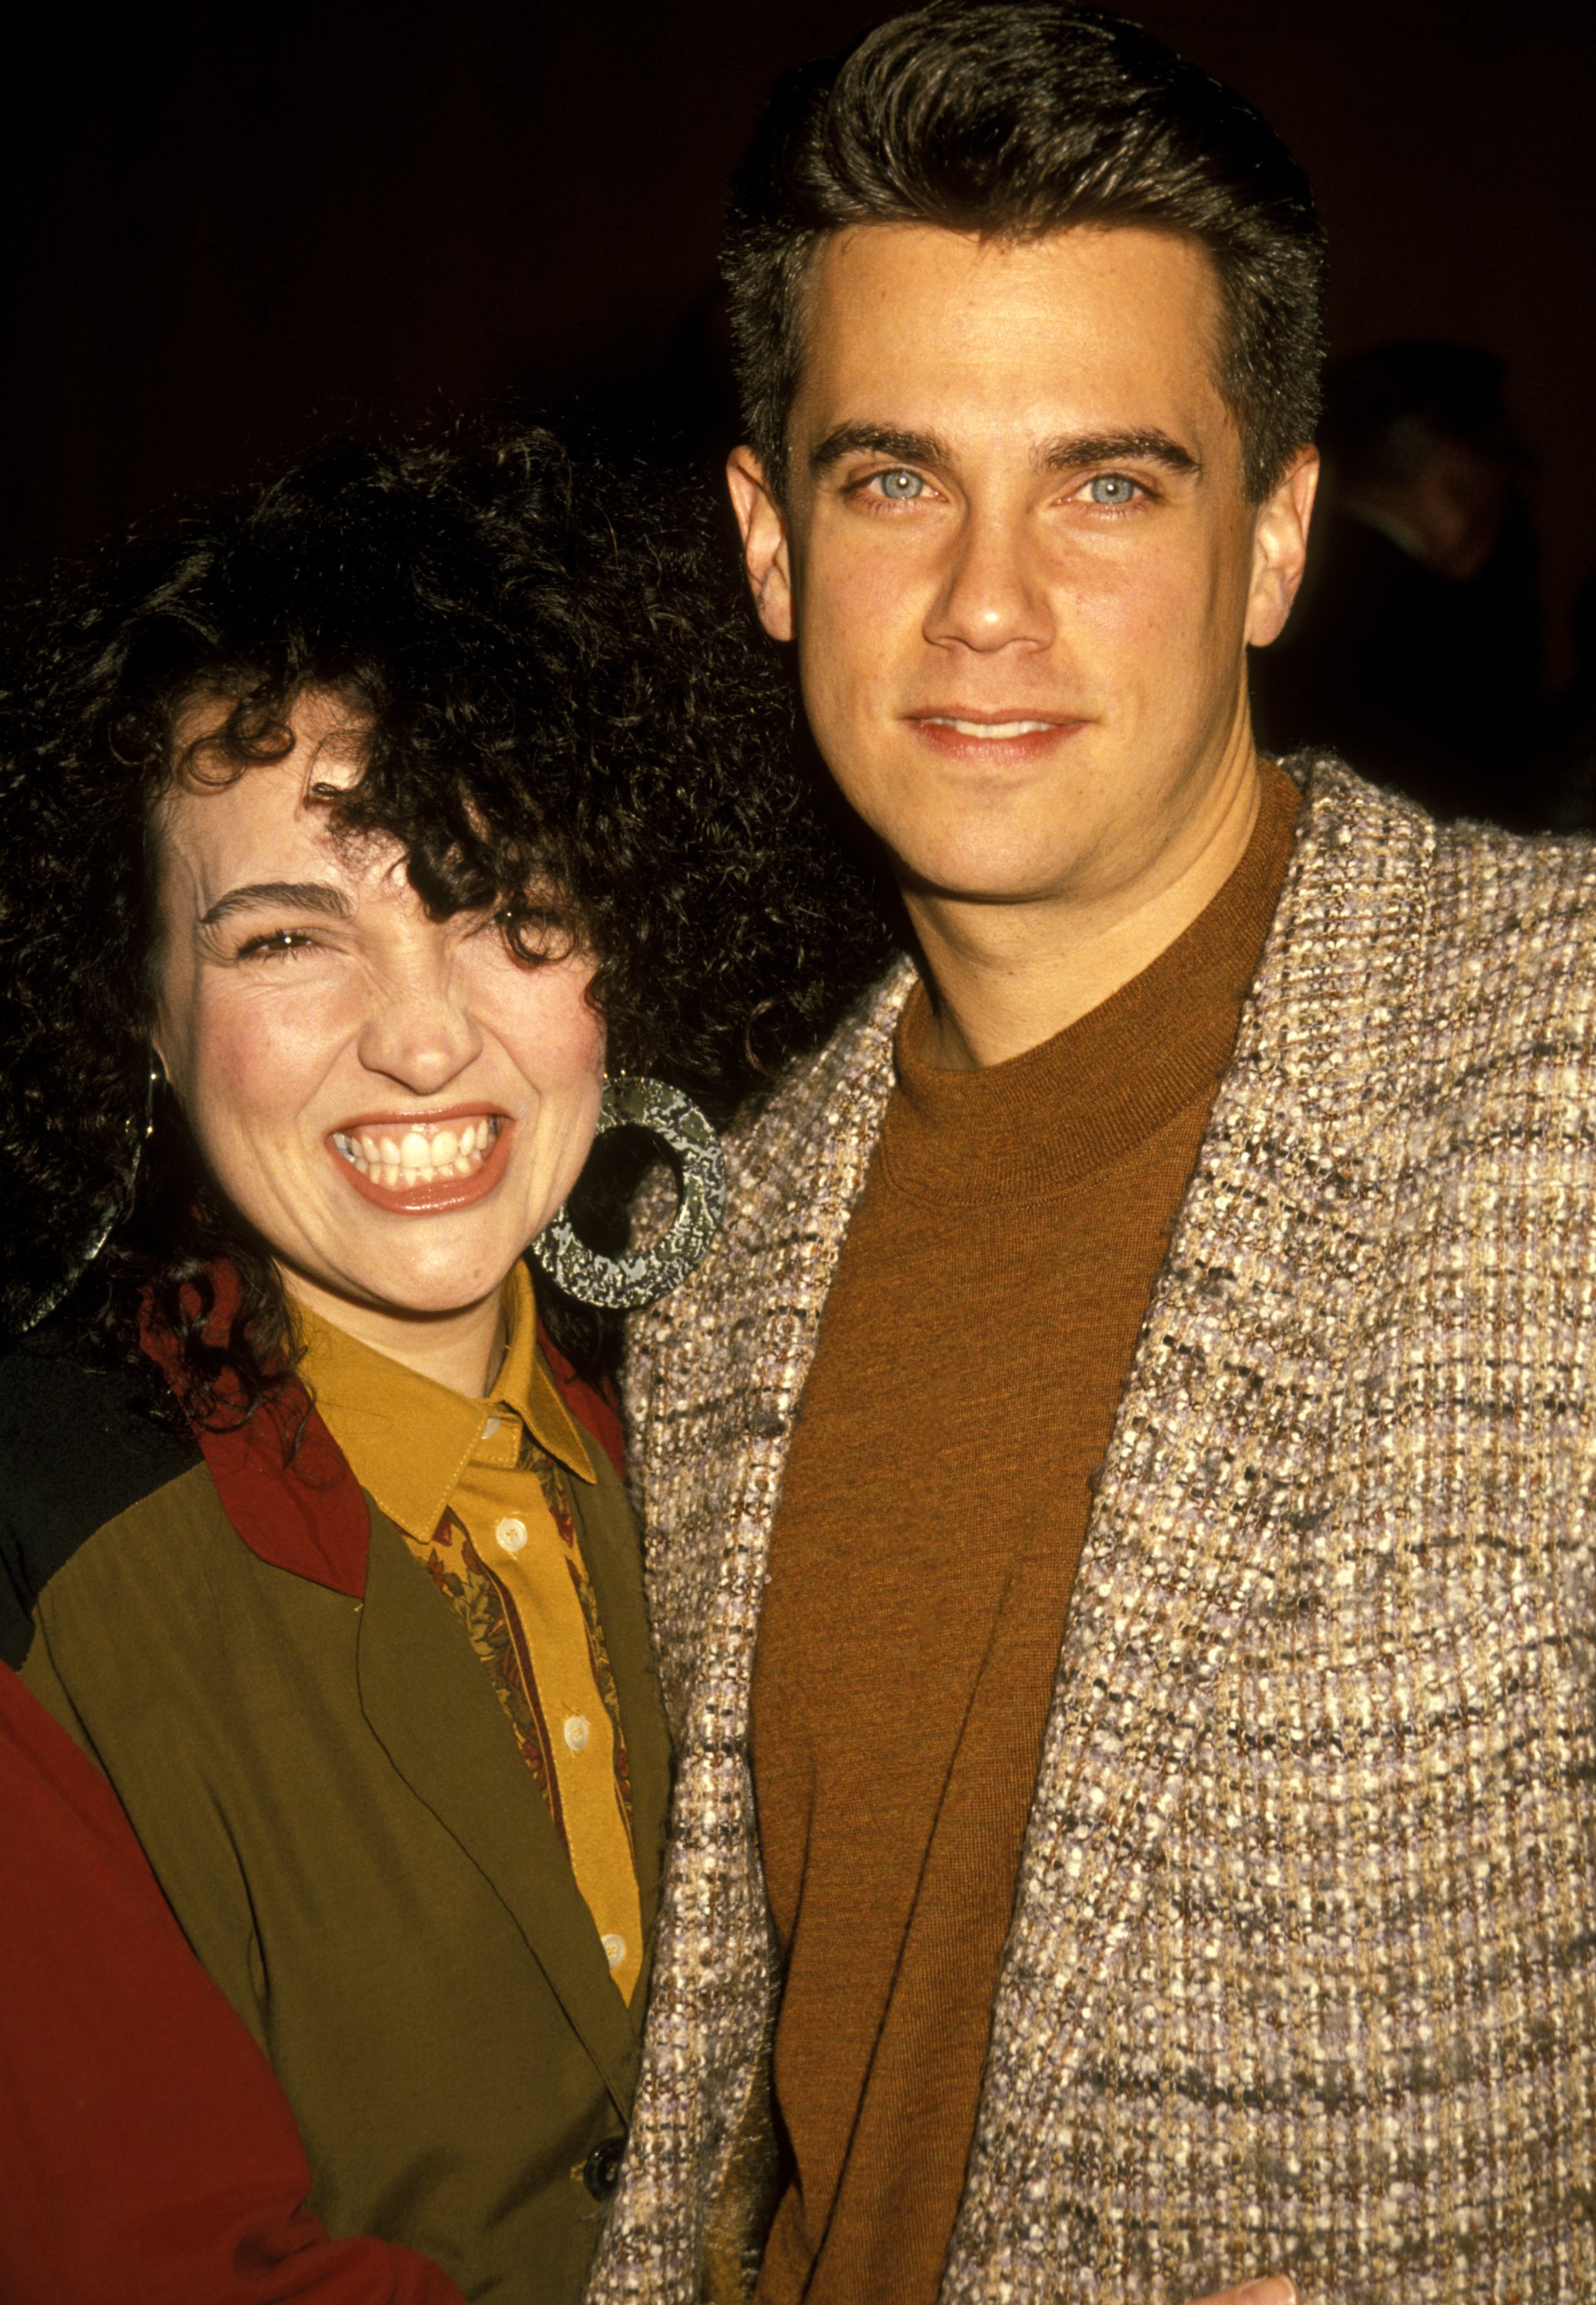 Robby Benson and Wife Karla DeVito during "Descending Angel" Los Angeles Premiere at Directors Guild in Hollywood, California, United States, in 1990 | Source: Getty Images